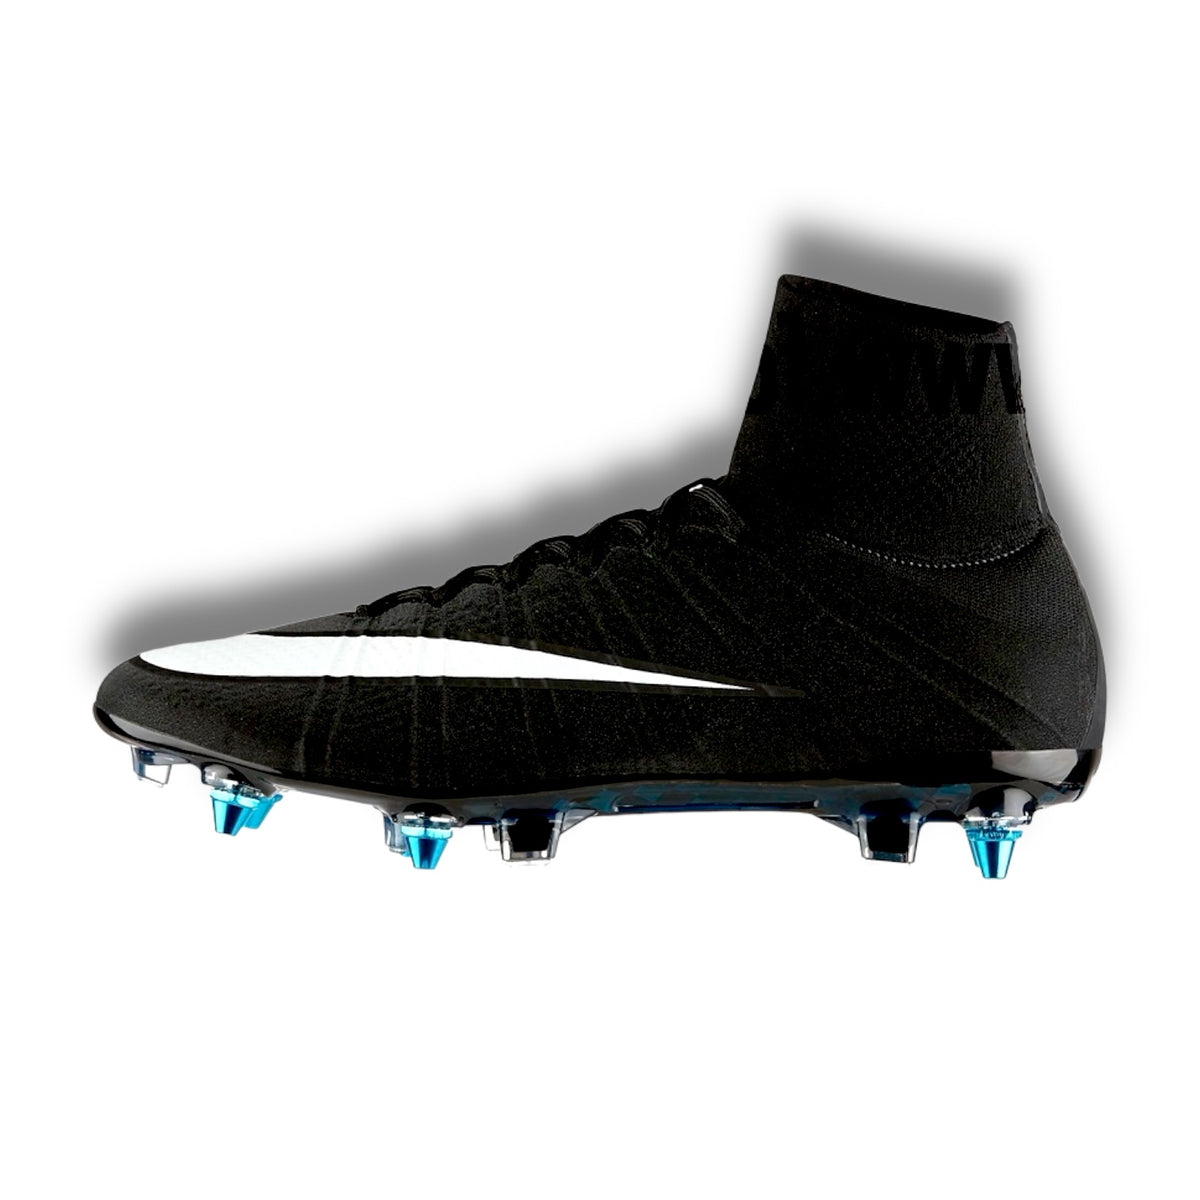 Nike Mercurial Superfly IV CR7 SG-Pro 014